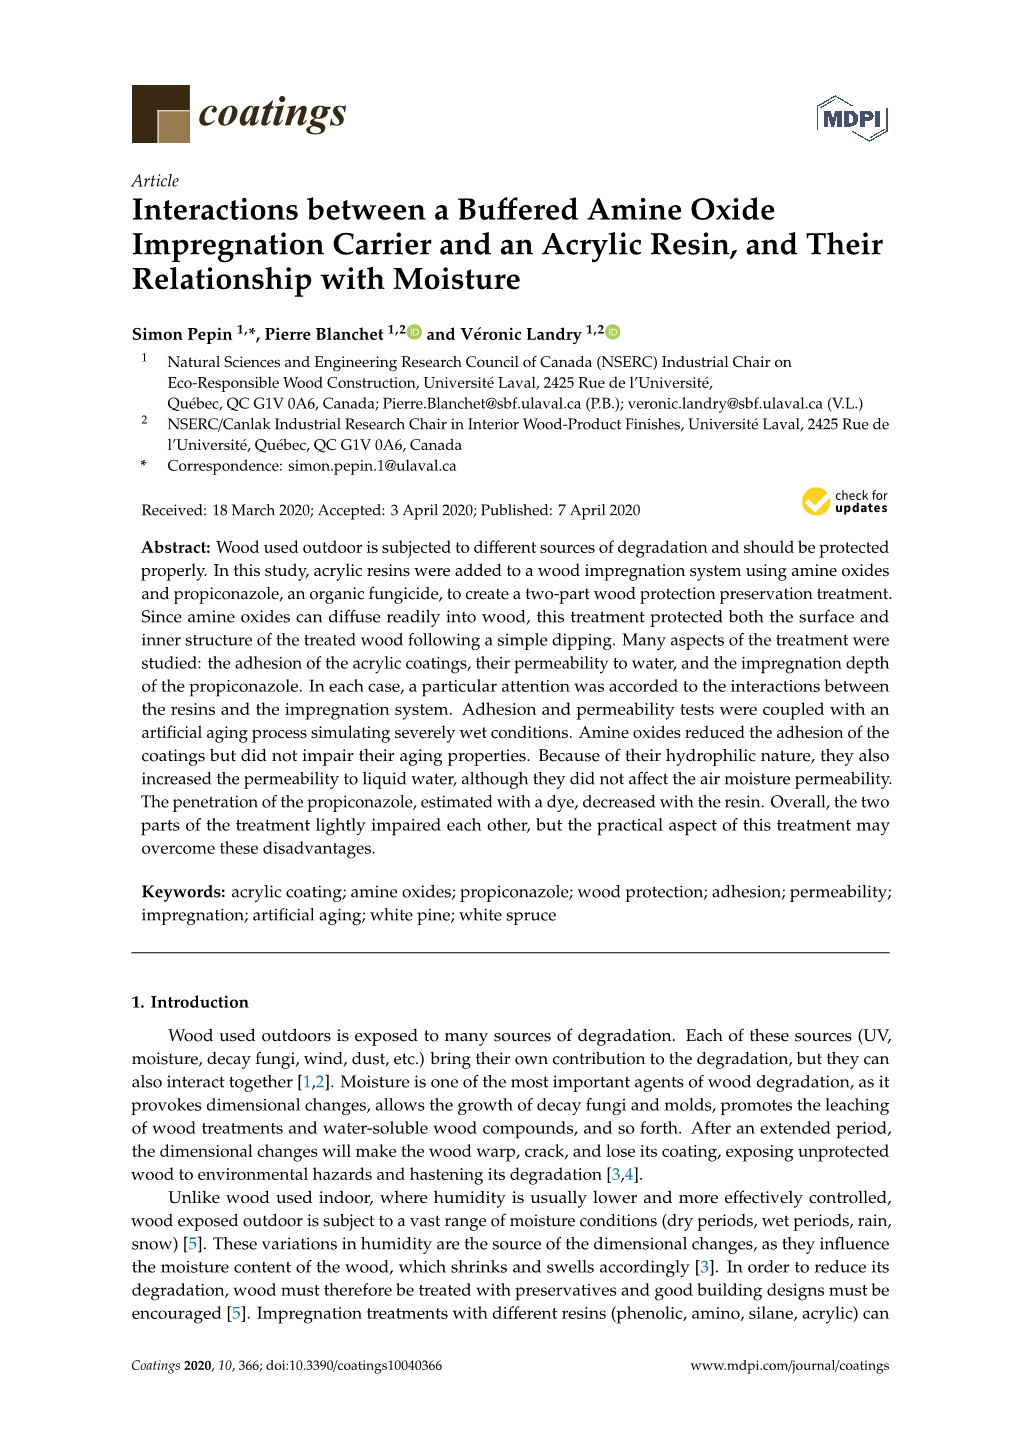 Interactions Between a Buffered Amine Oxide Impregnation Carrier and an Acrylic Resin, and Their Relationship with Moisture